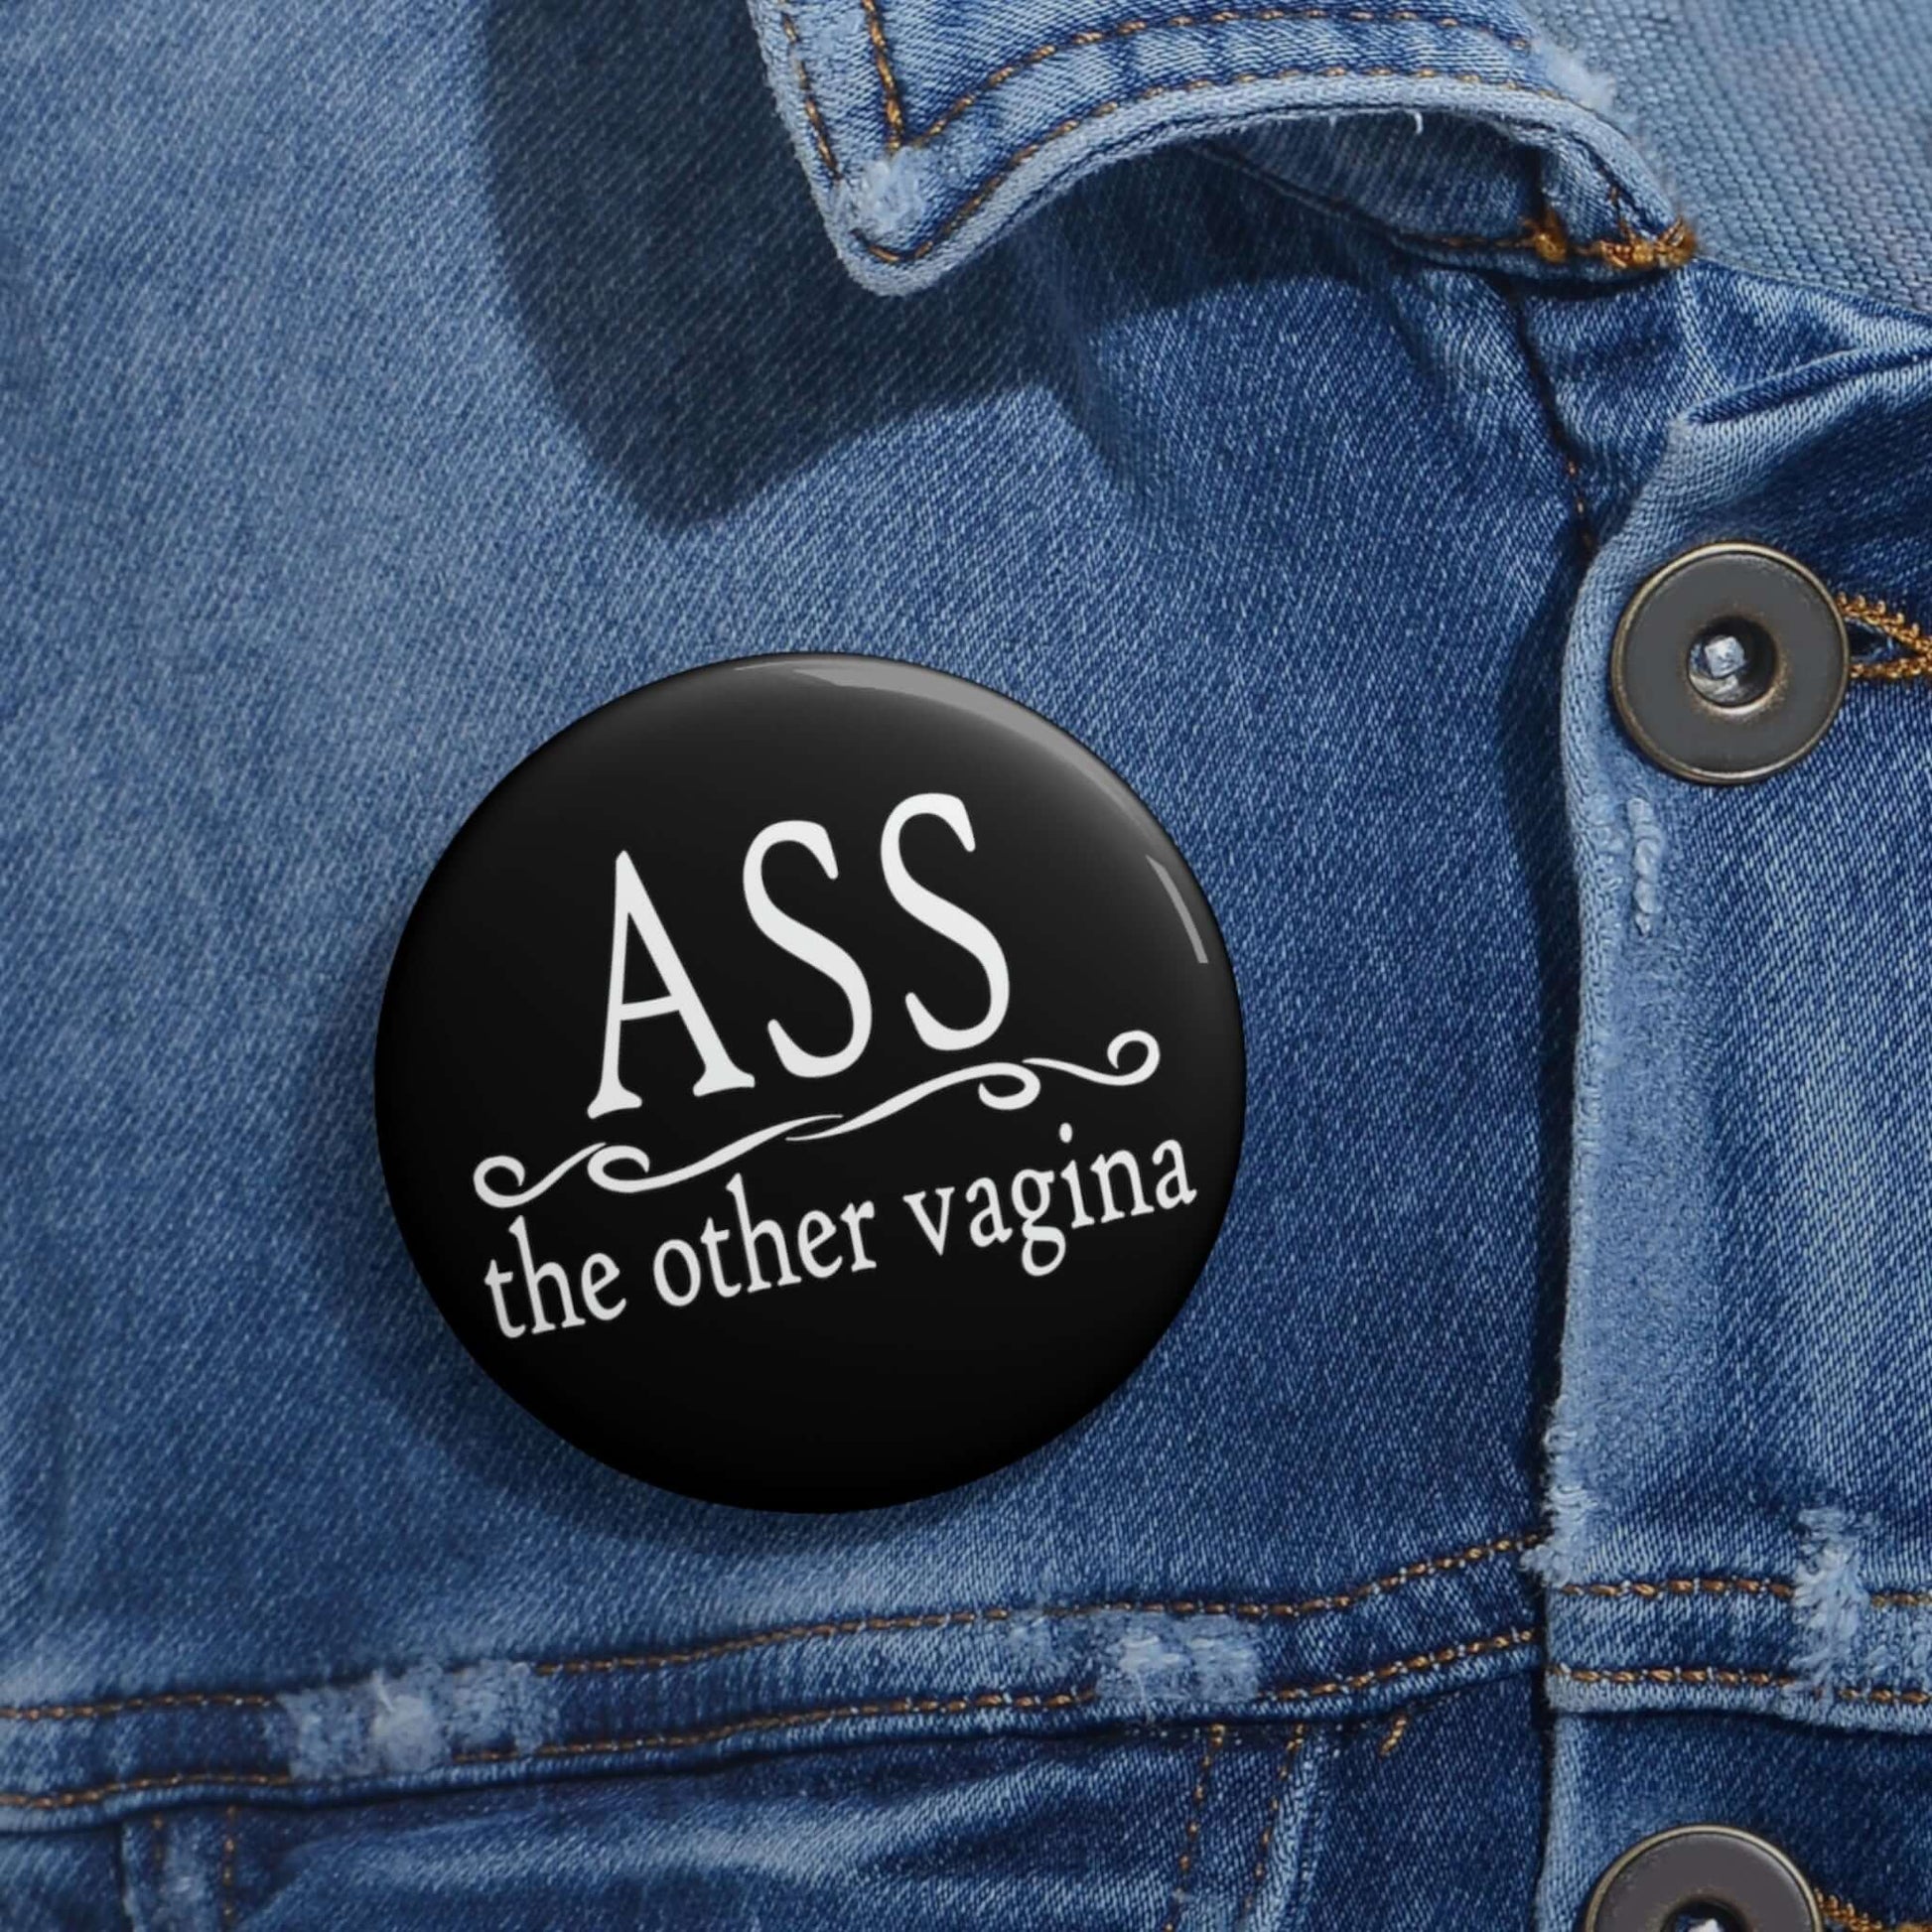 Pinback button that says Ass, the other vagina.